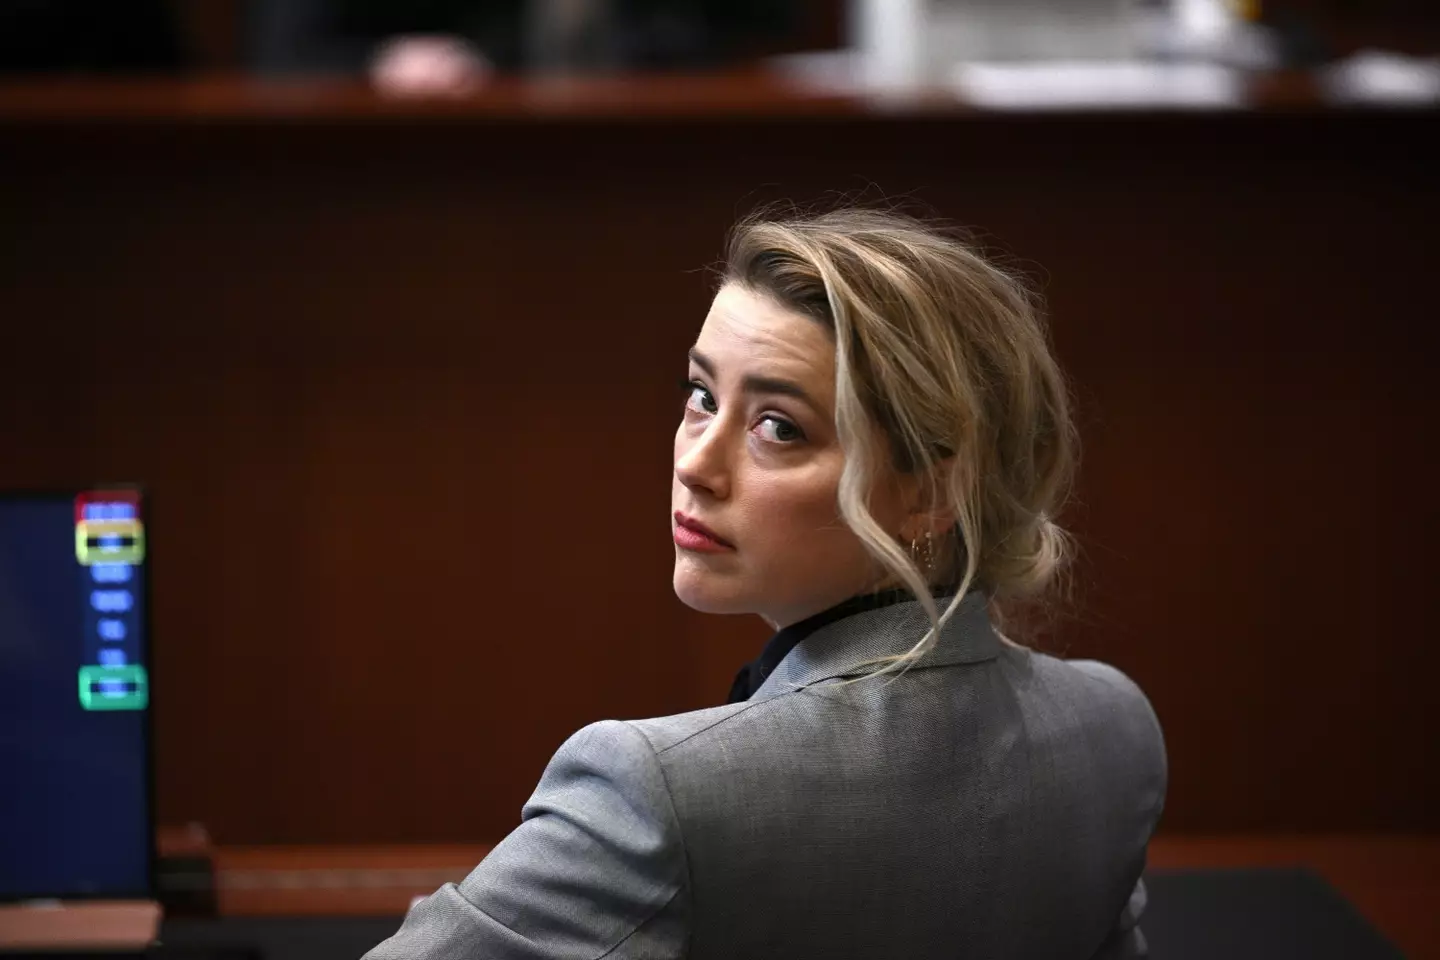 Amber Heard has reportedly sold her home in California for $1.05million.